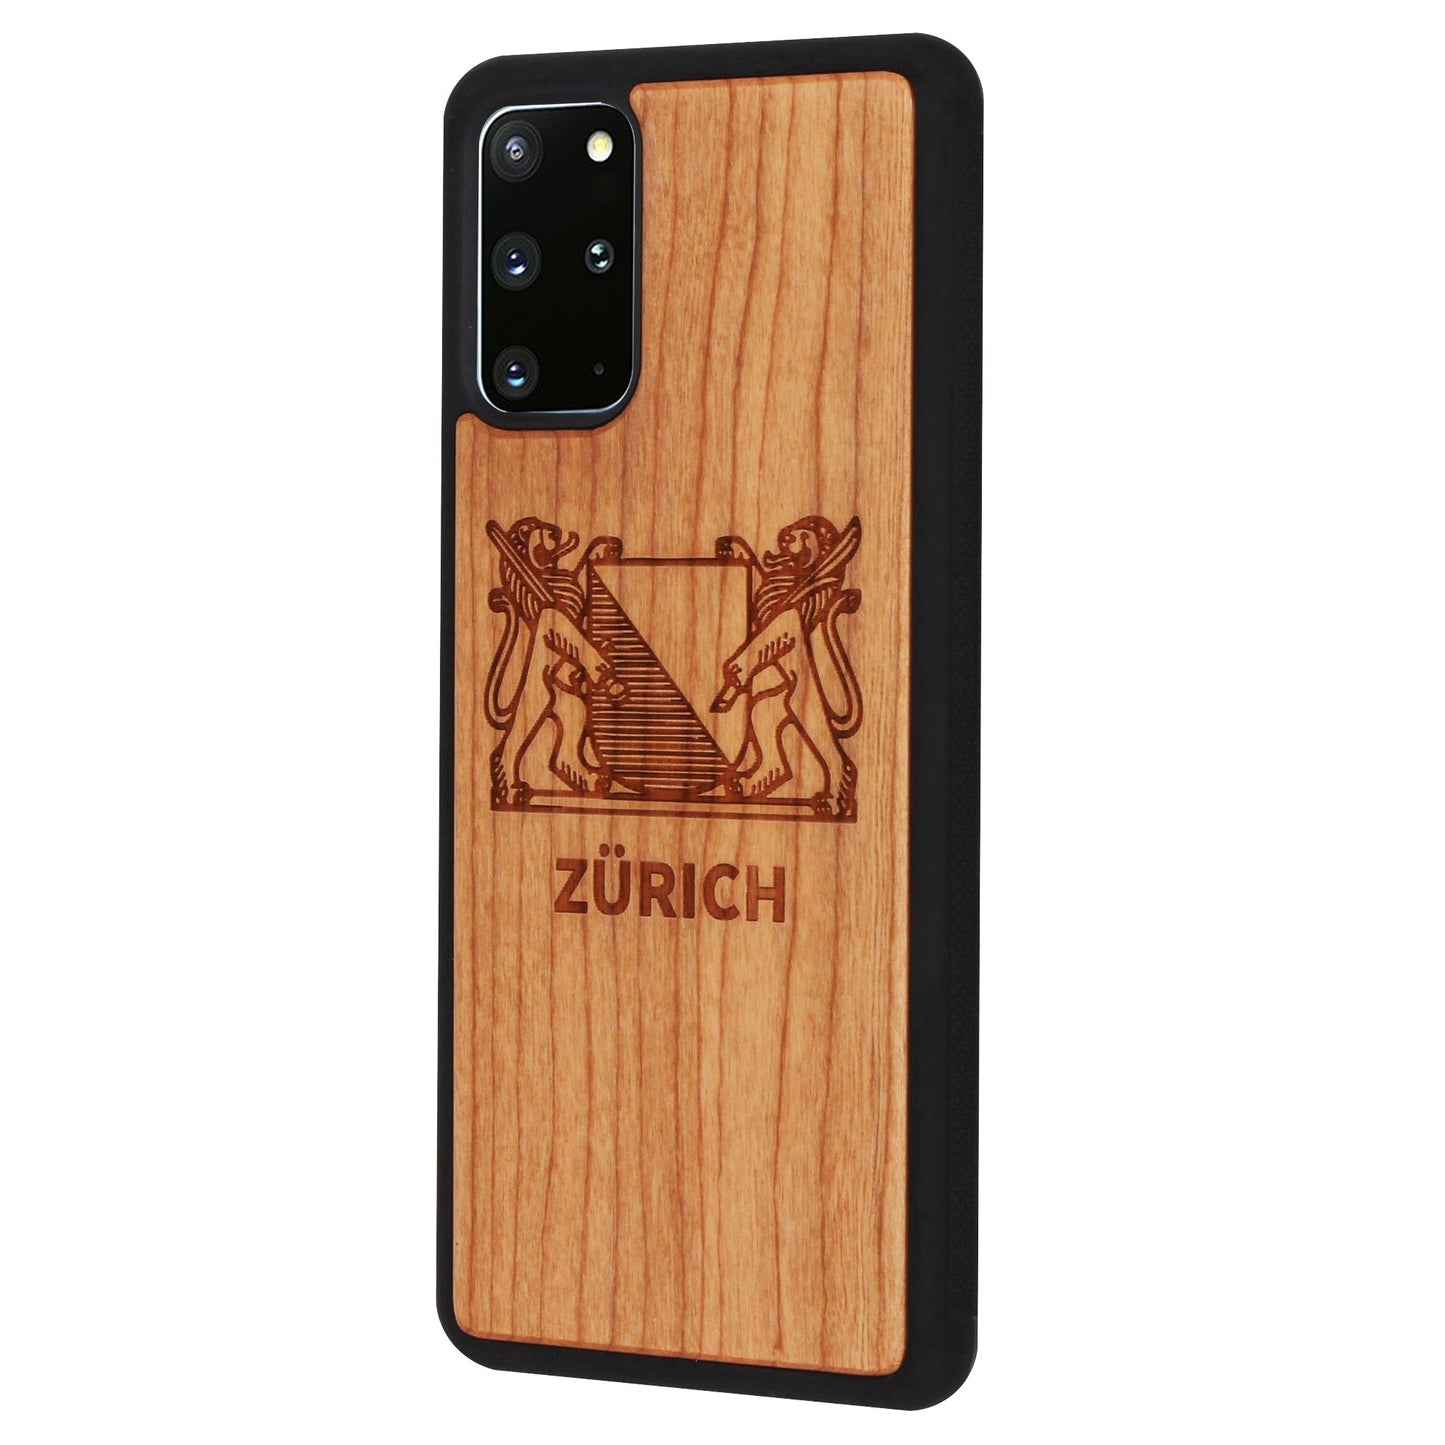 Zurich coat of arms Eden case made of cherry wood for Samsung Galaxy S20 Plus